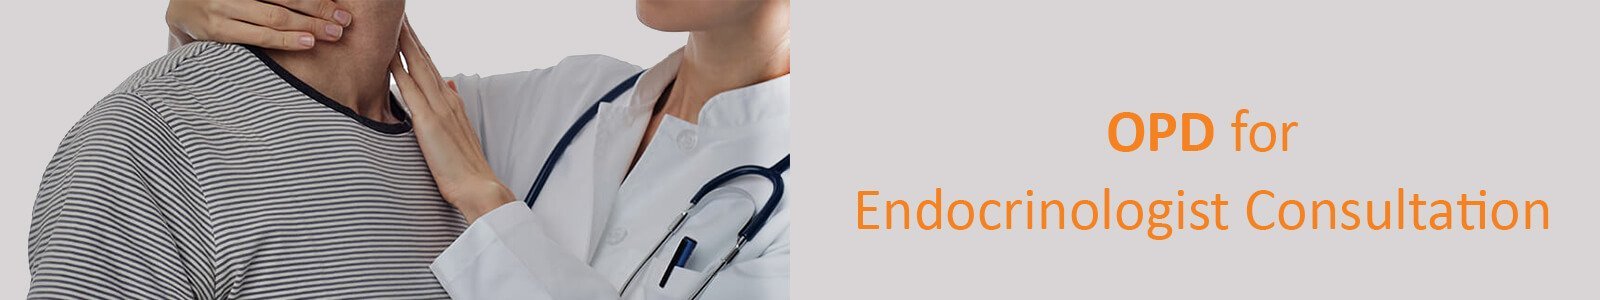 OPD for endocrinologist consultation